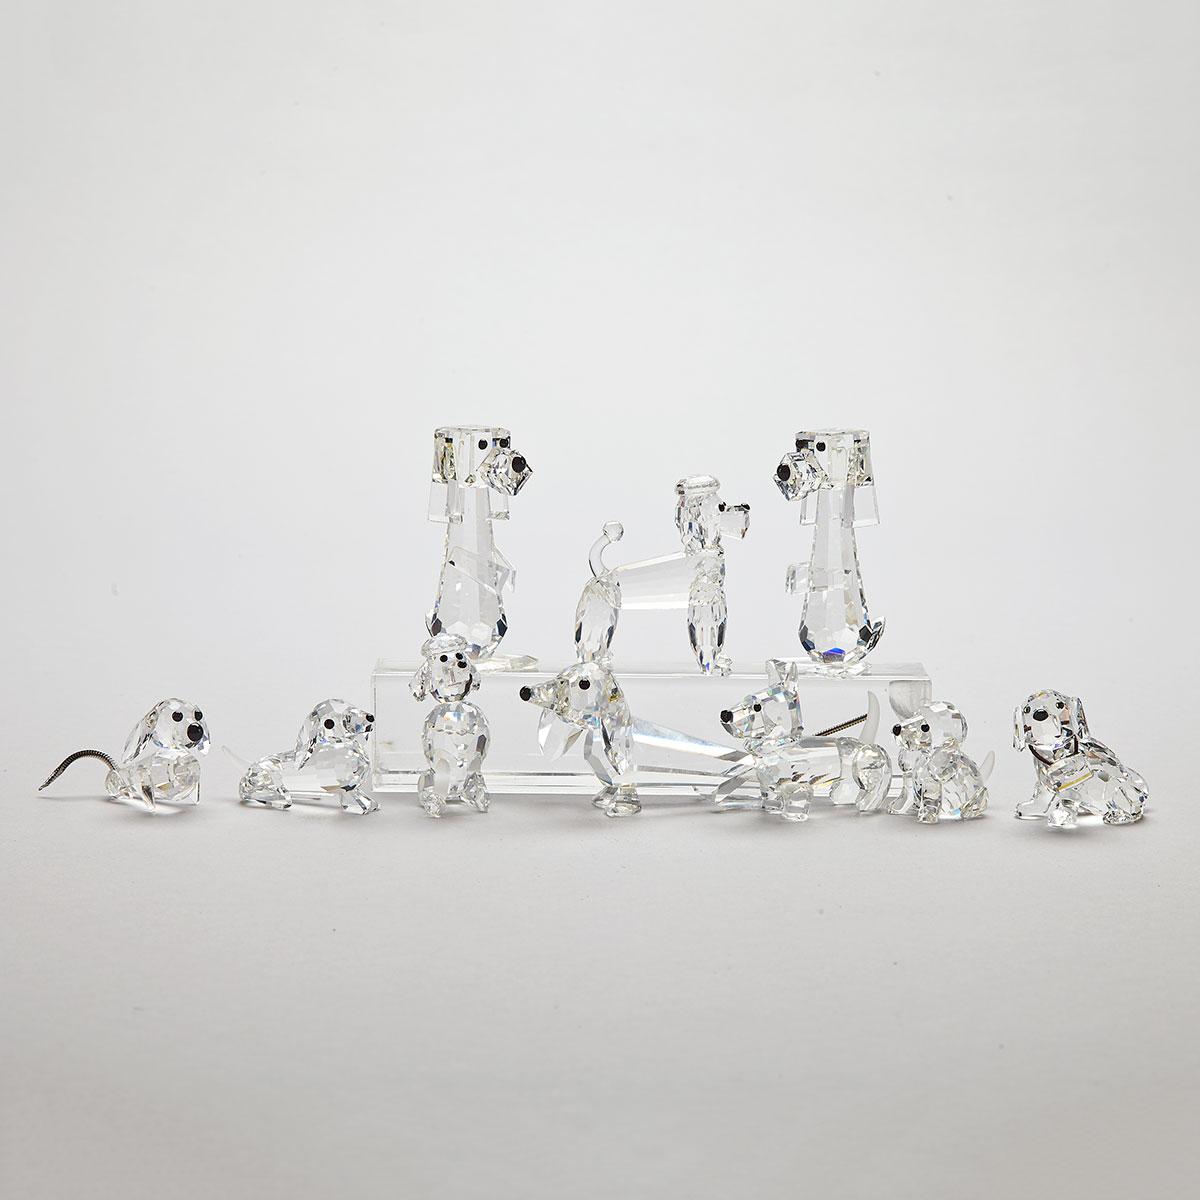 Ten Swarovski Crystal Dogs, late 20th/early 21st century